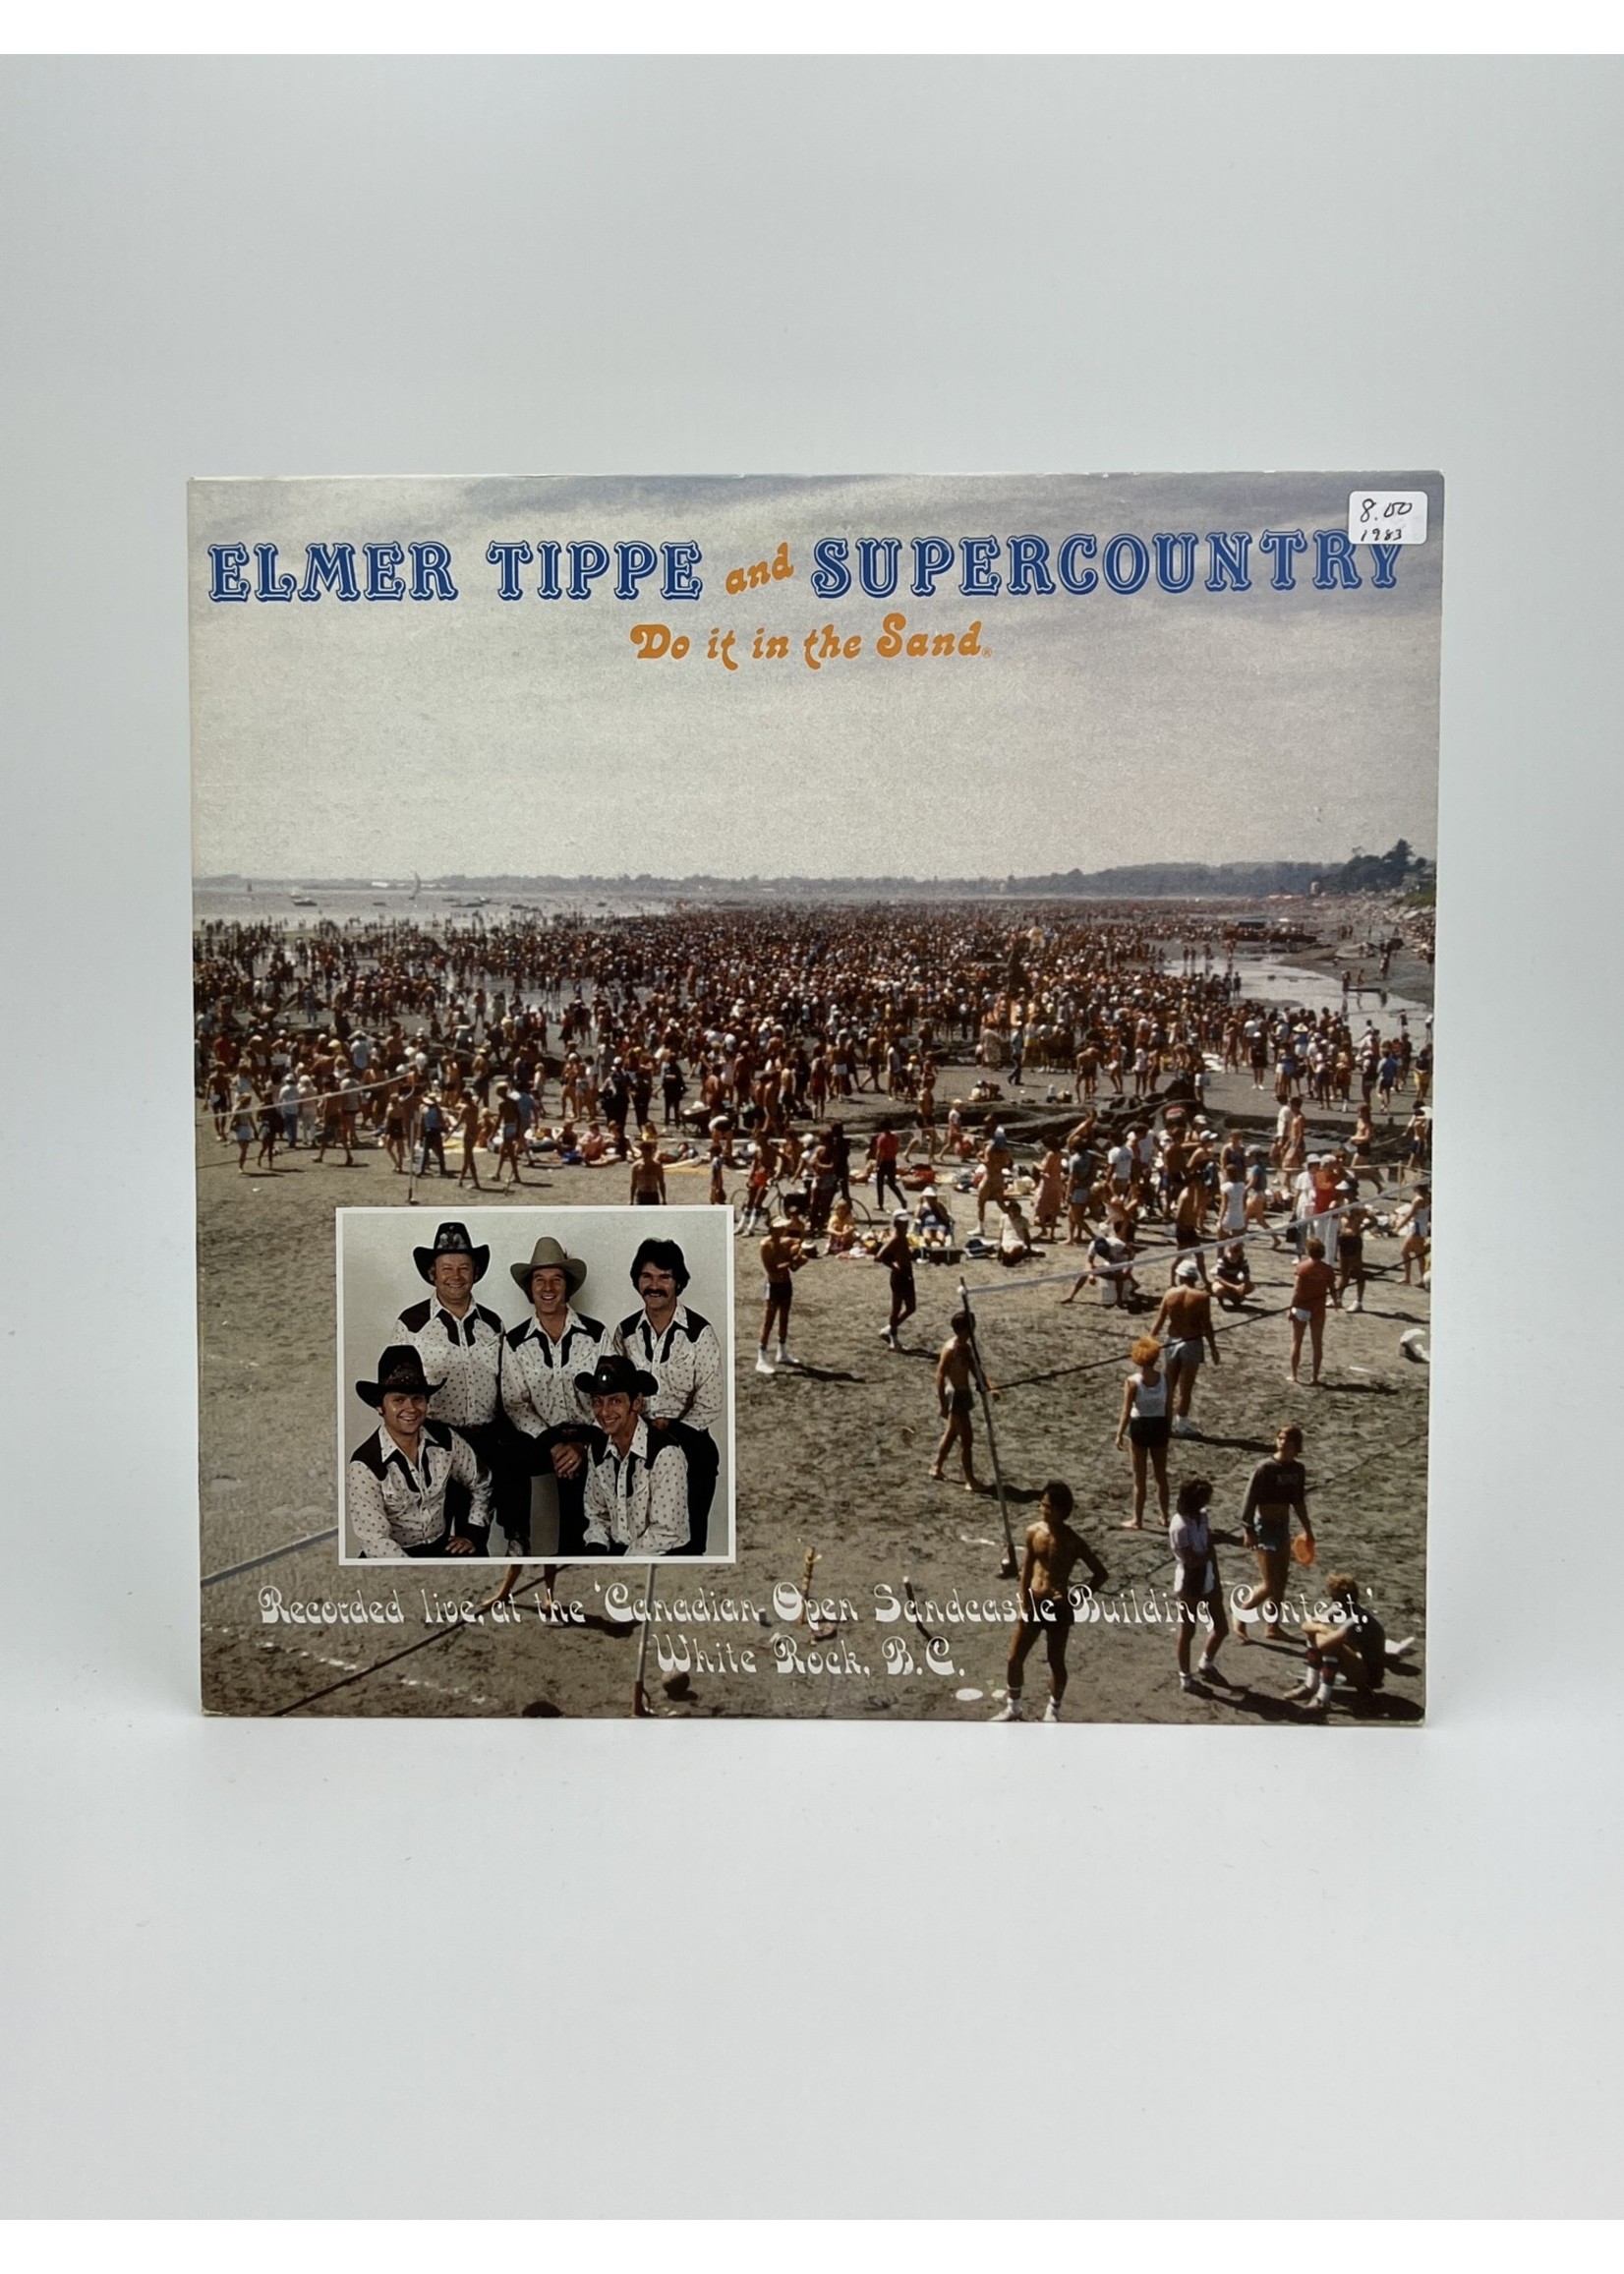 LP Elmer Tippe and Supercountry Do It In The Band LP Record